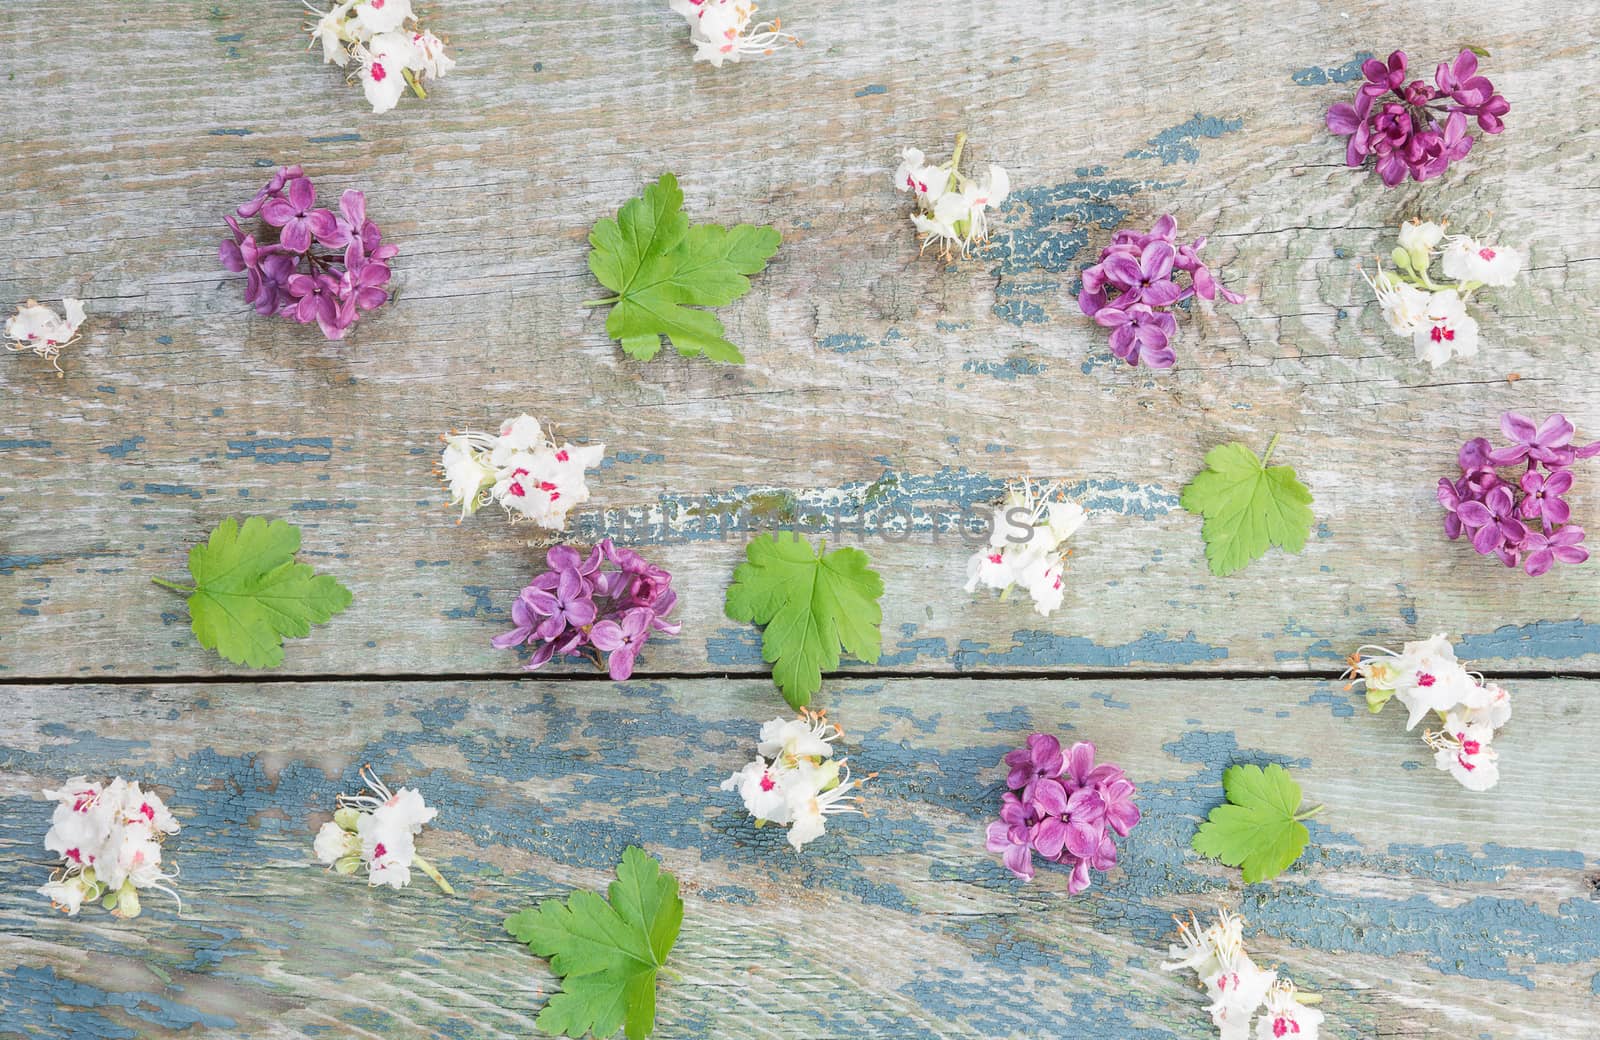 Small red flowers of lilac, white flowers of chestnut and green leaves are spread on the old wooden background; flat lay, top view, overhead view